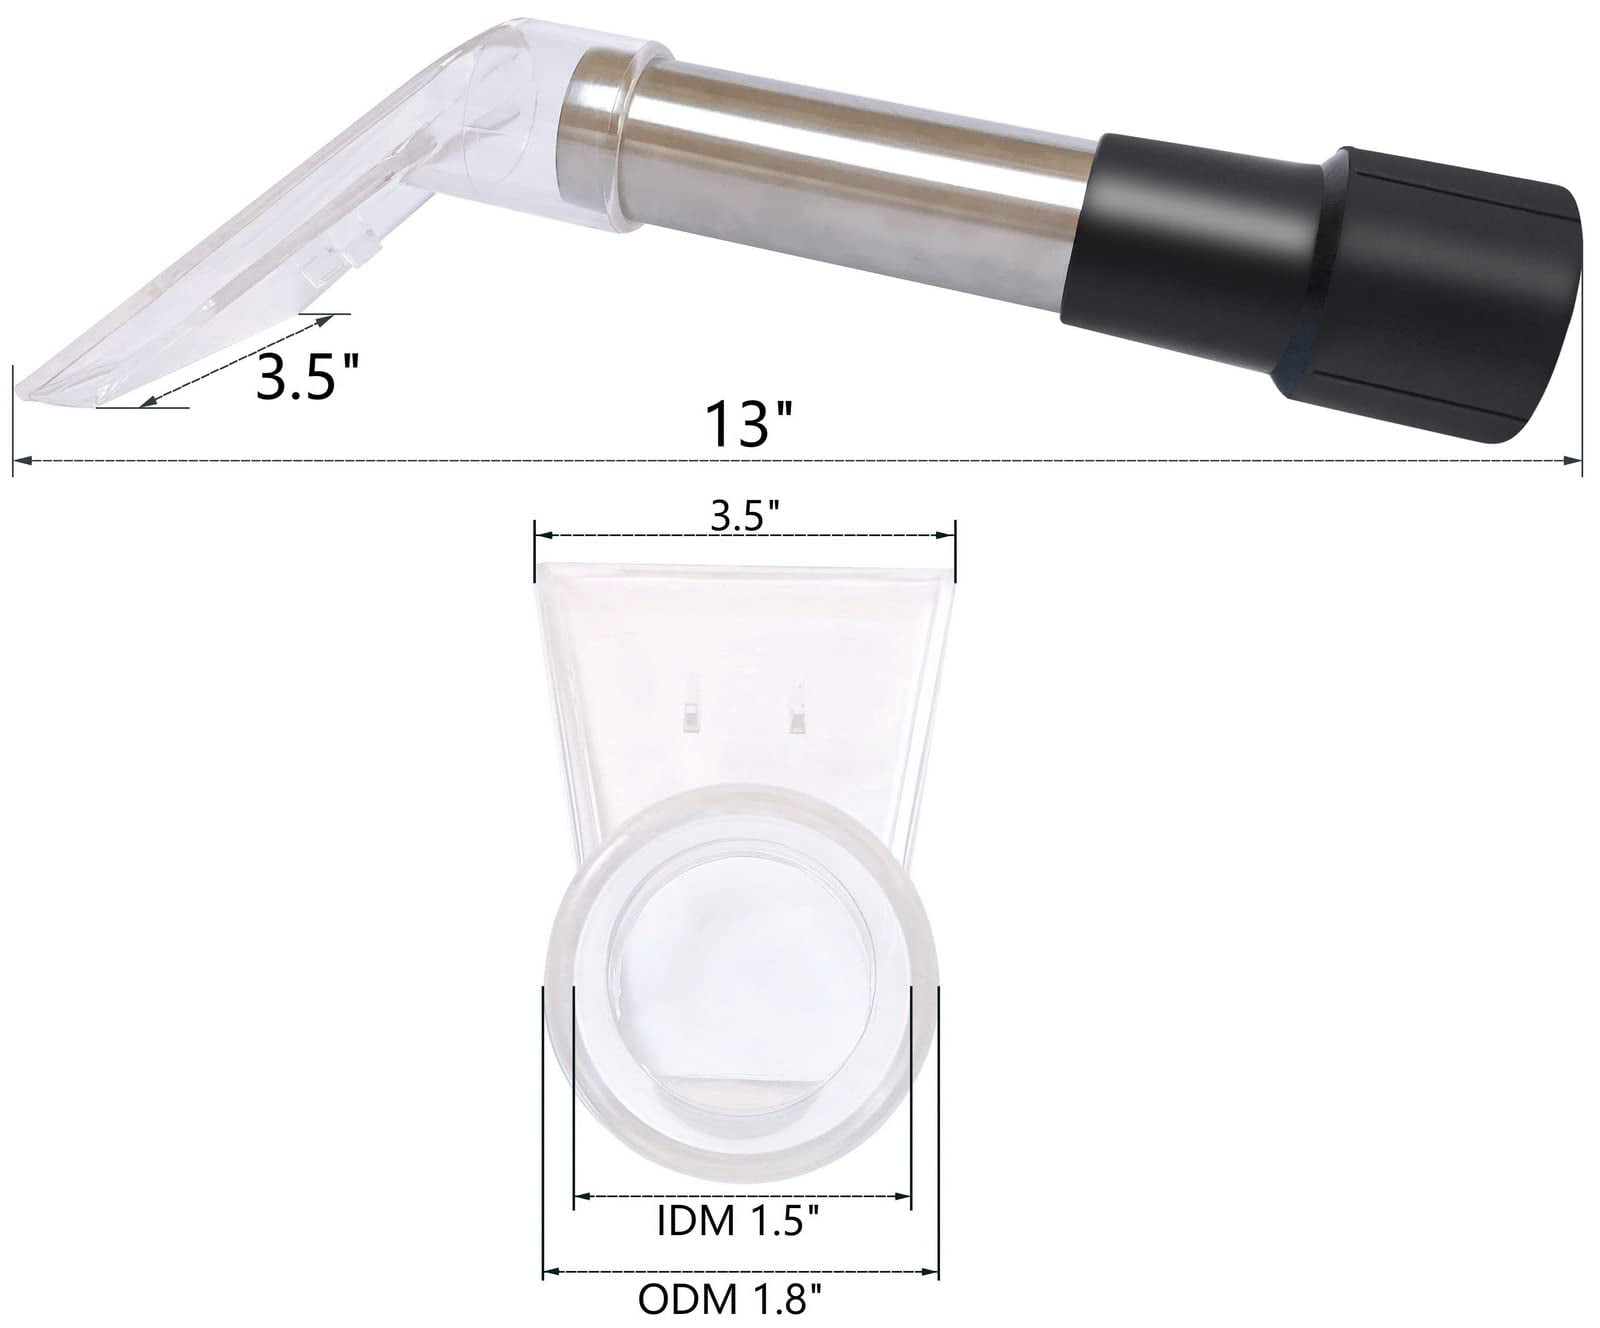 Sharing this because I found it very useful. These shop vac extractor  attachments are $15 on  and are so much more powerful than my bissel.  Comparatively my wet/dry vac was $25